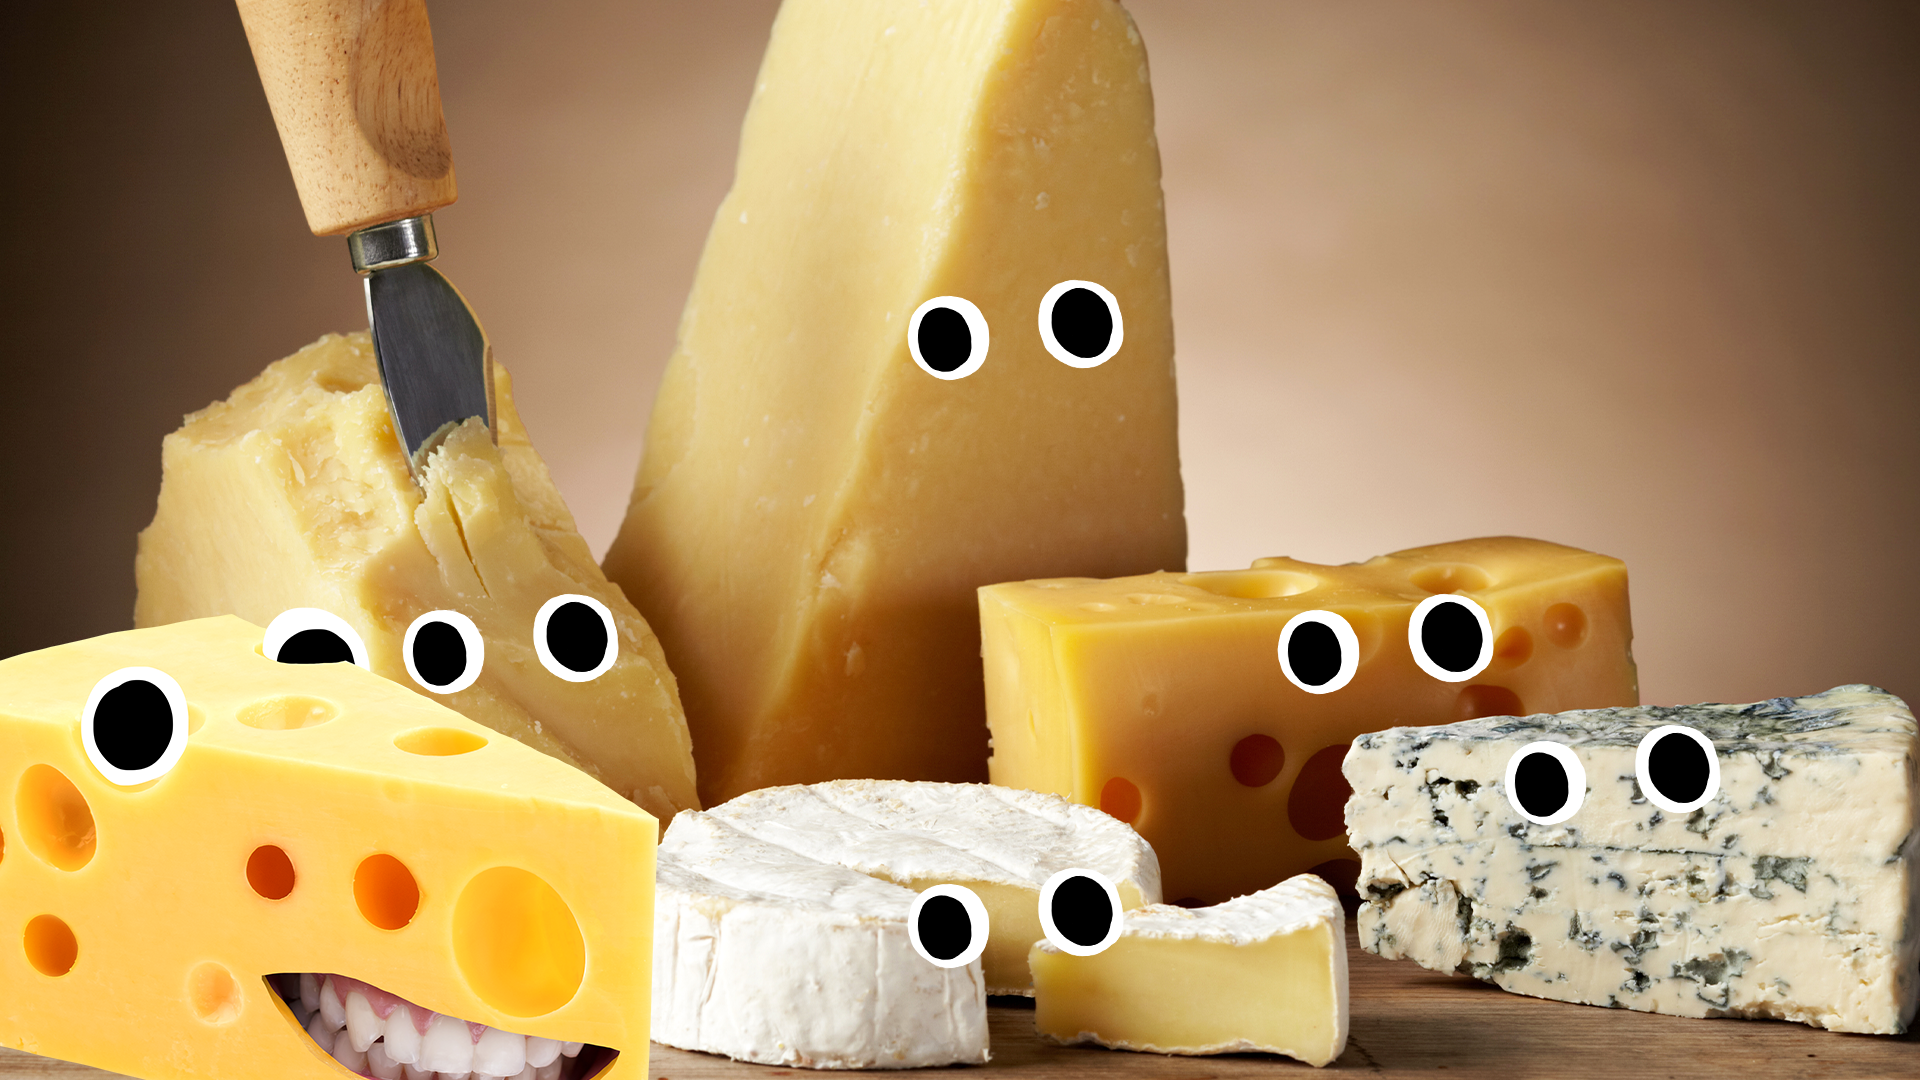 A variety of stinky cheeses